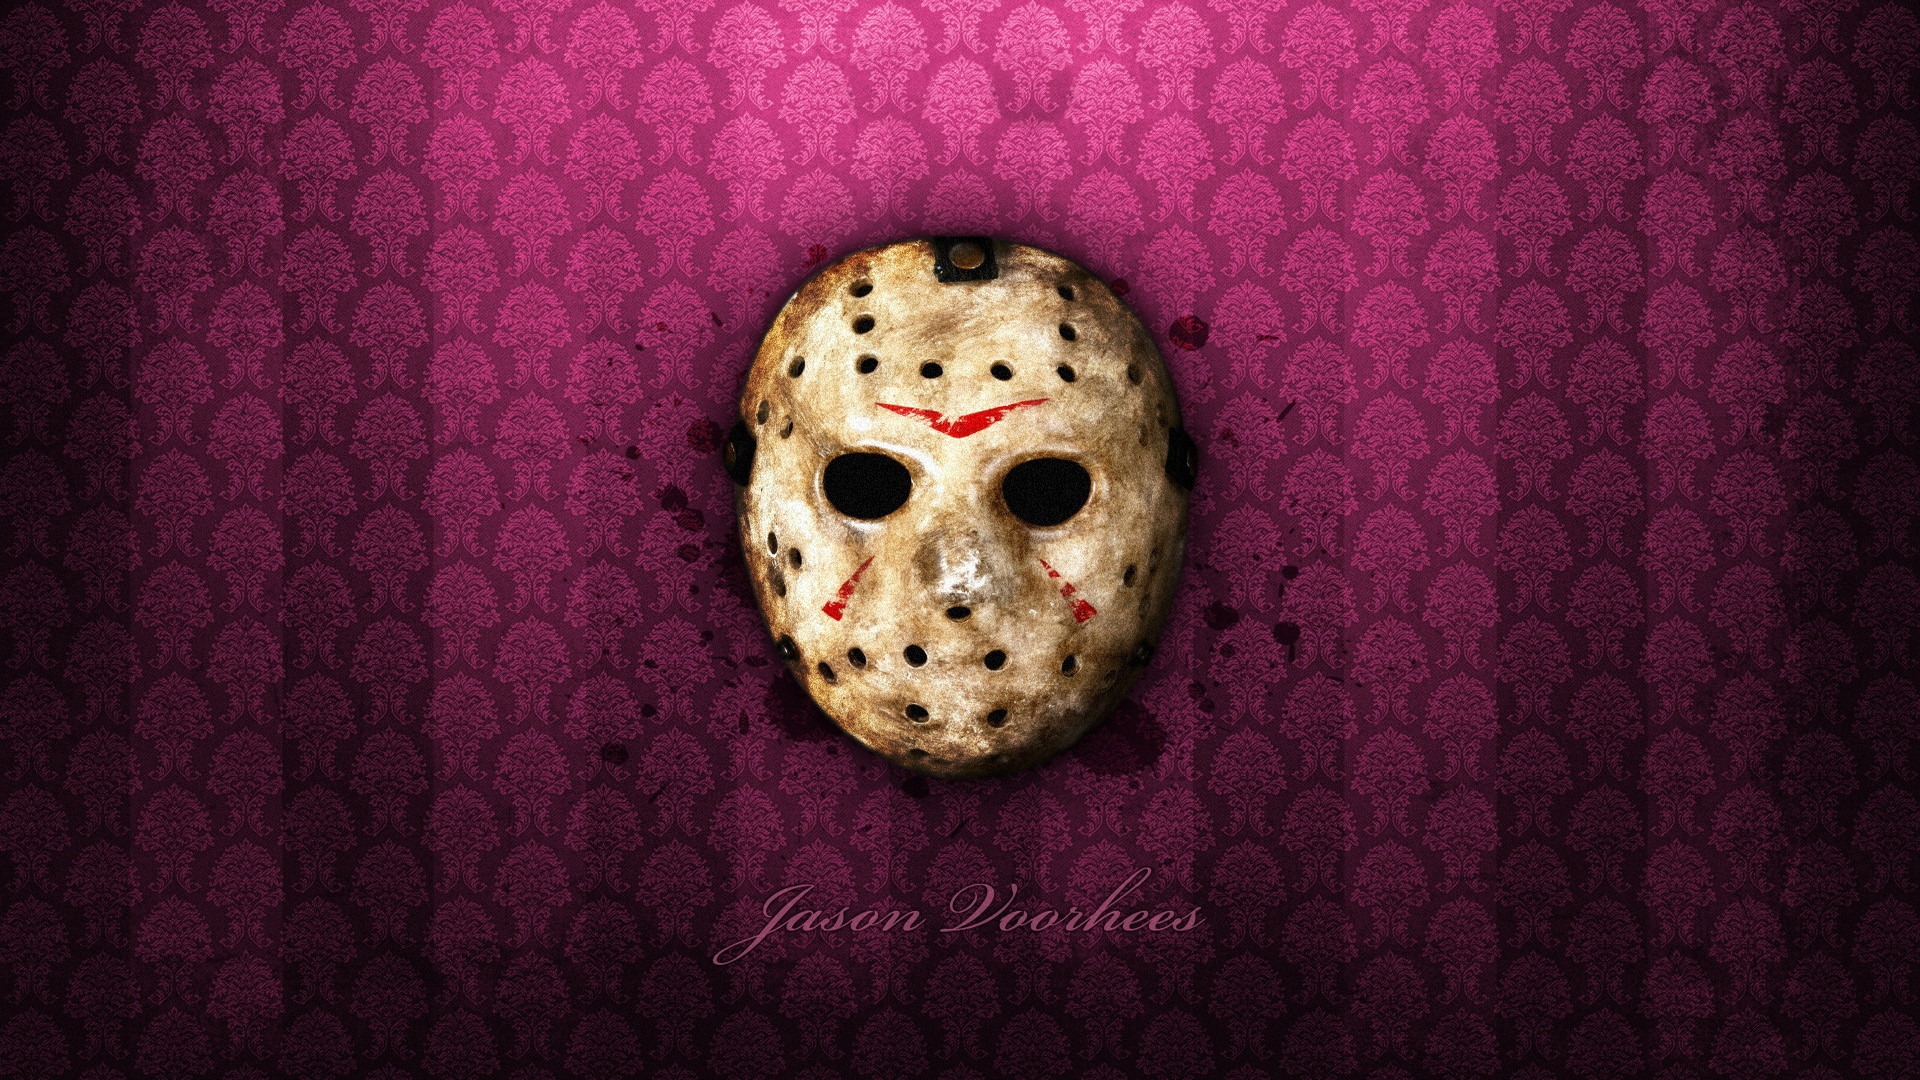 Jason Voorhees for 1920 x 1080 HDTV 1080p resolution